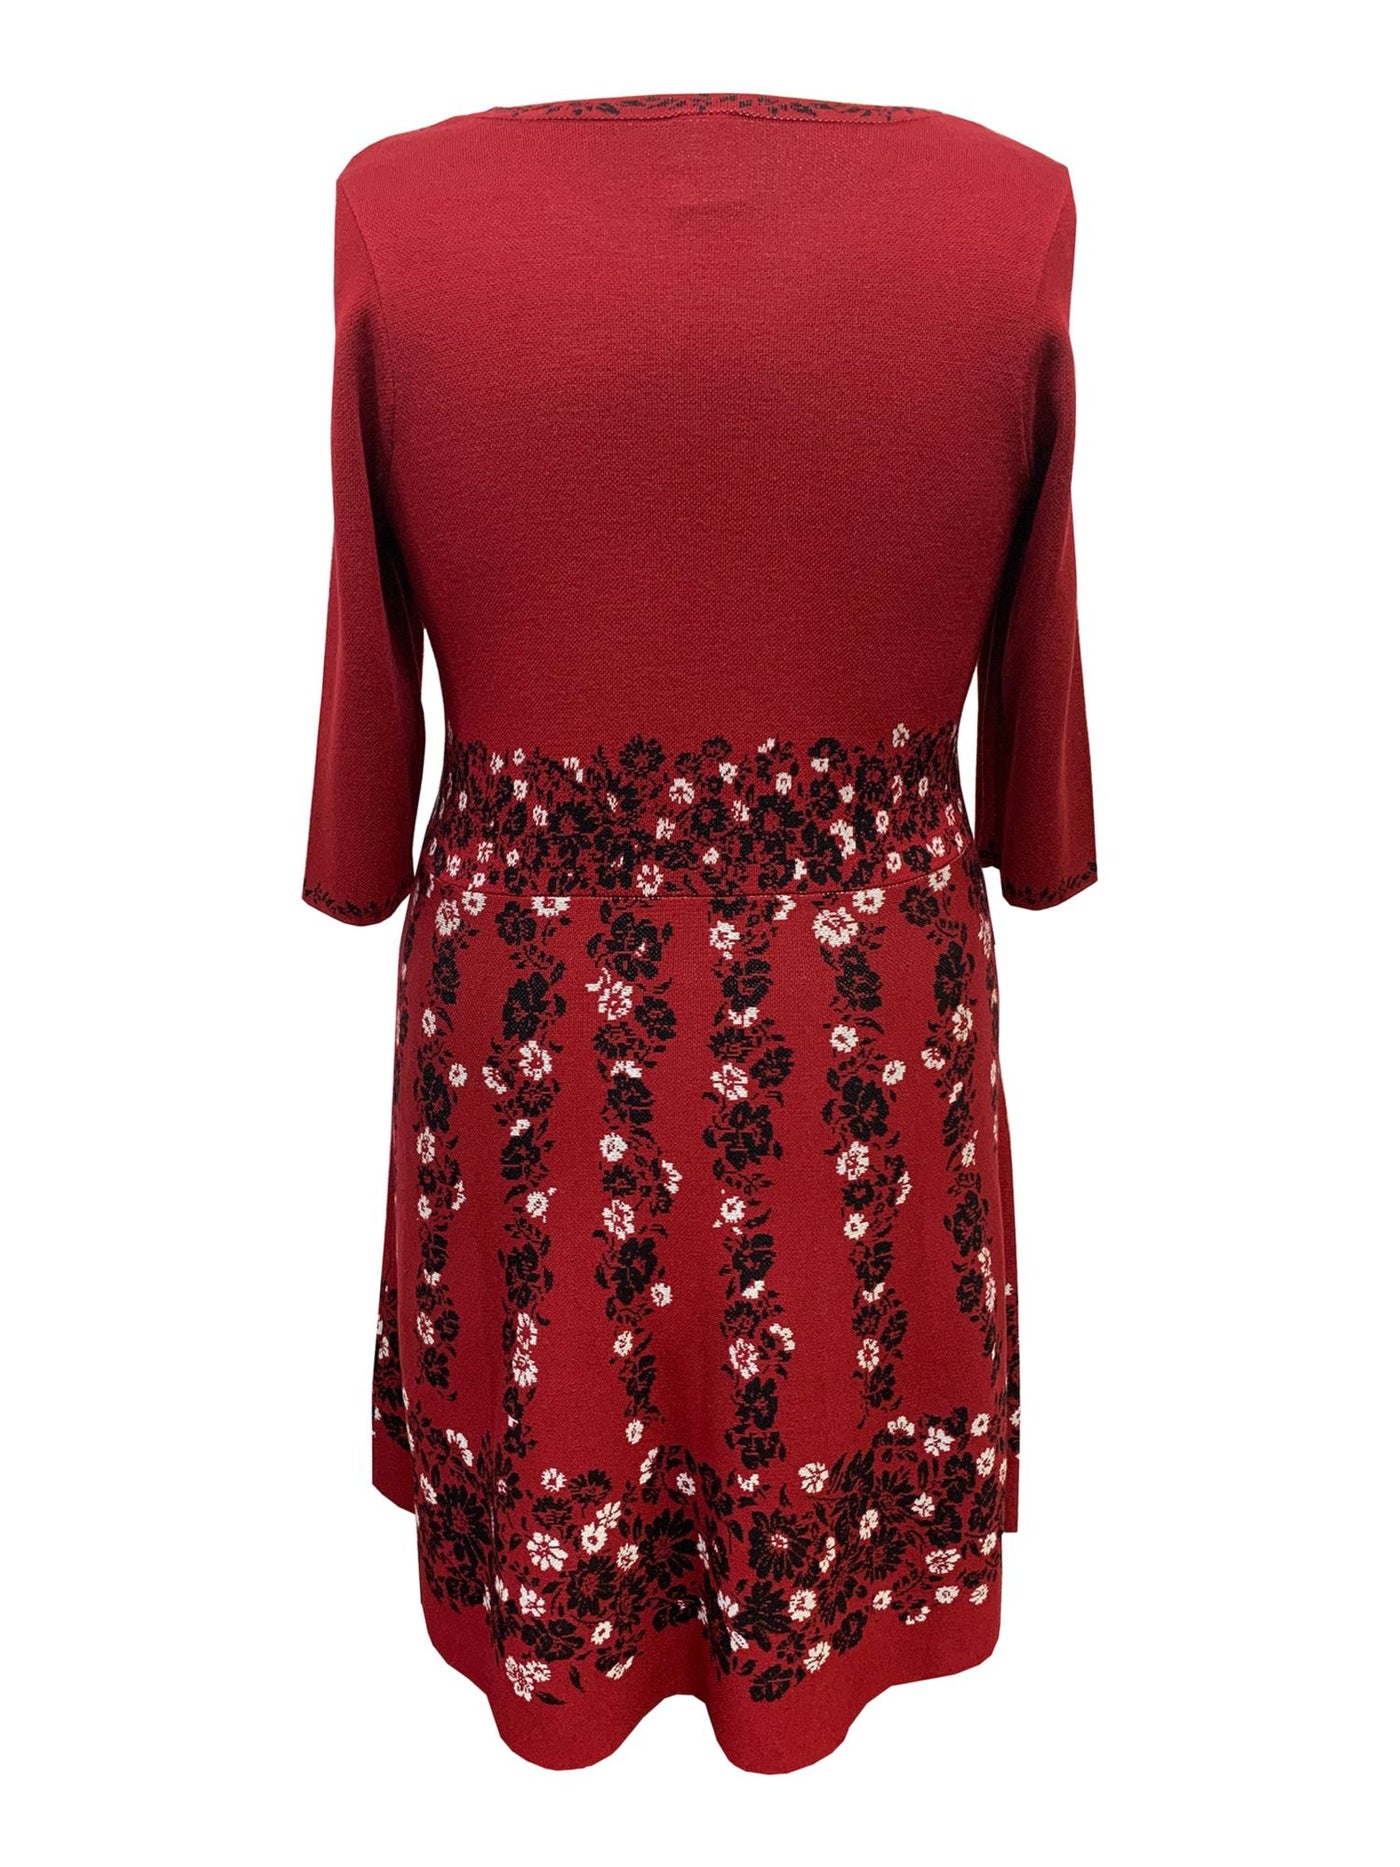 TAYLOR Womens Red Knit Floral 3/4 Sleeve Jewel Neck Knee Length Wear To Work Sweater Dress Plus 1X